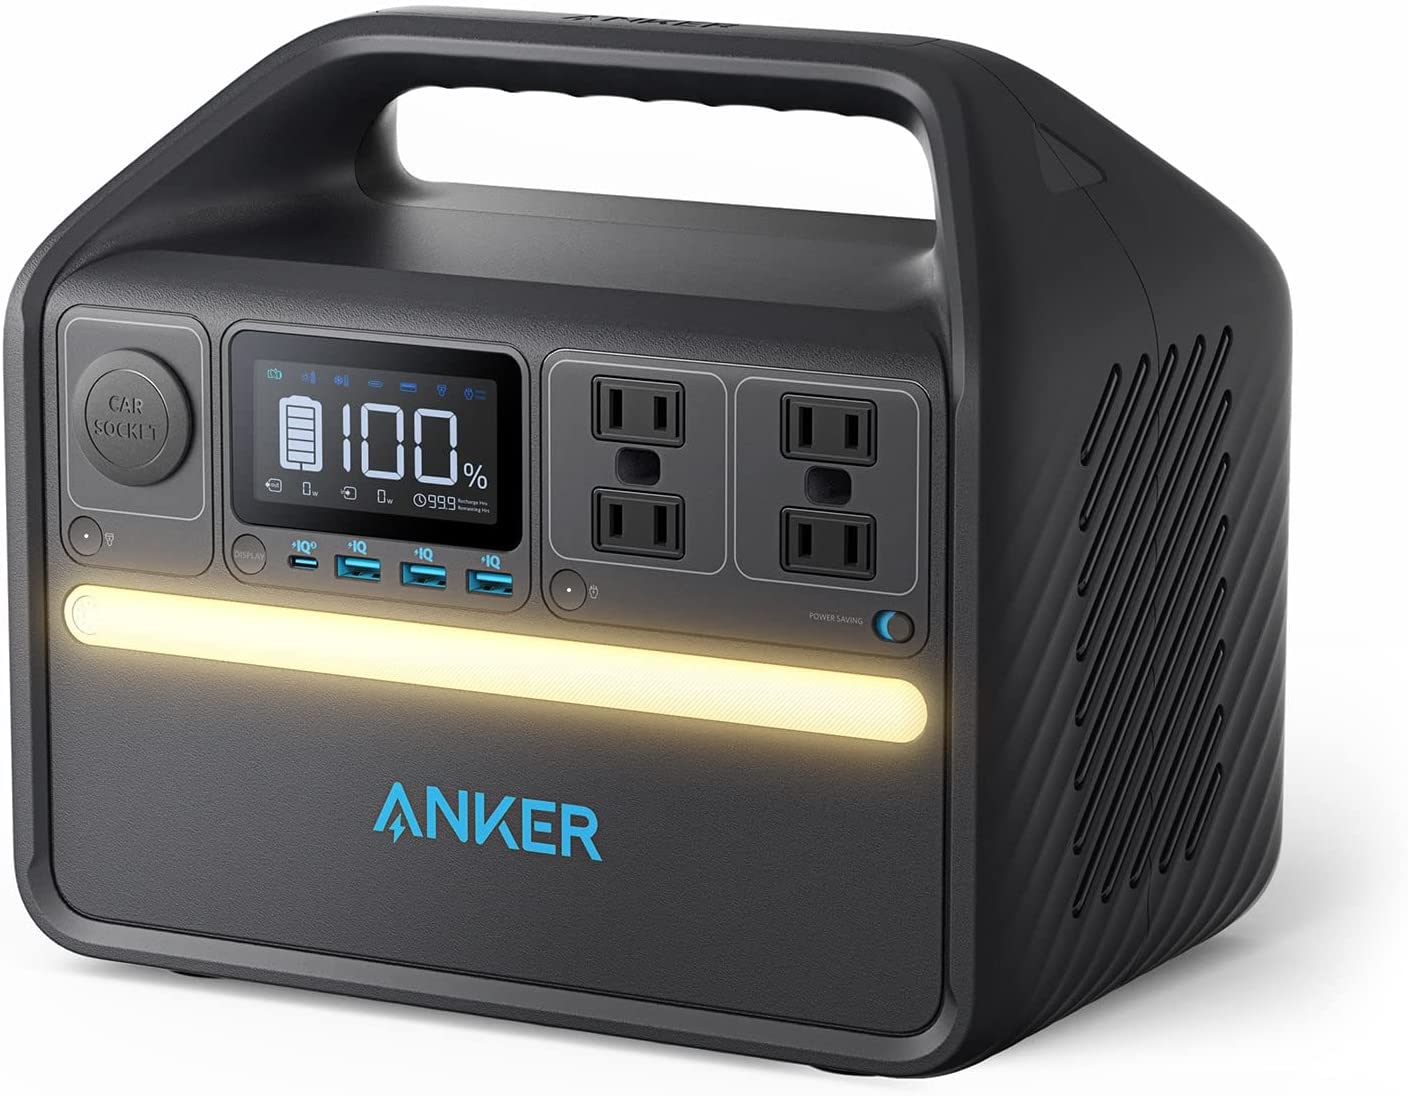 Anker Introduces the 555 Portable Power Station for Multi-functional Power On-the-Go, Just in Time for Camping Season 1